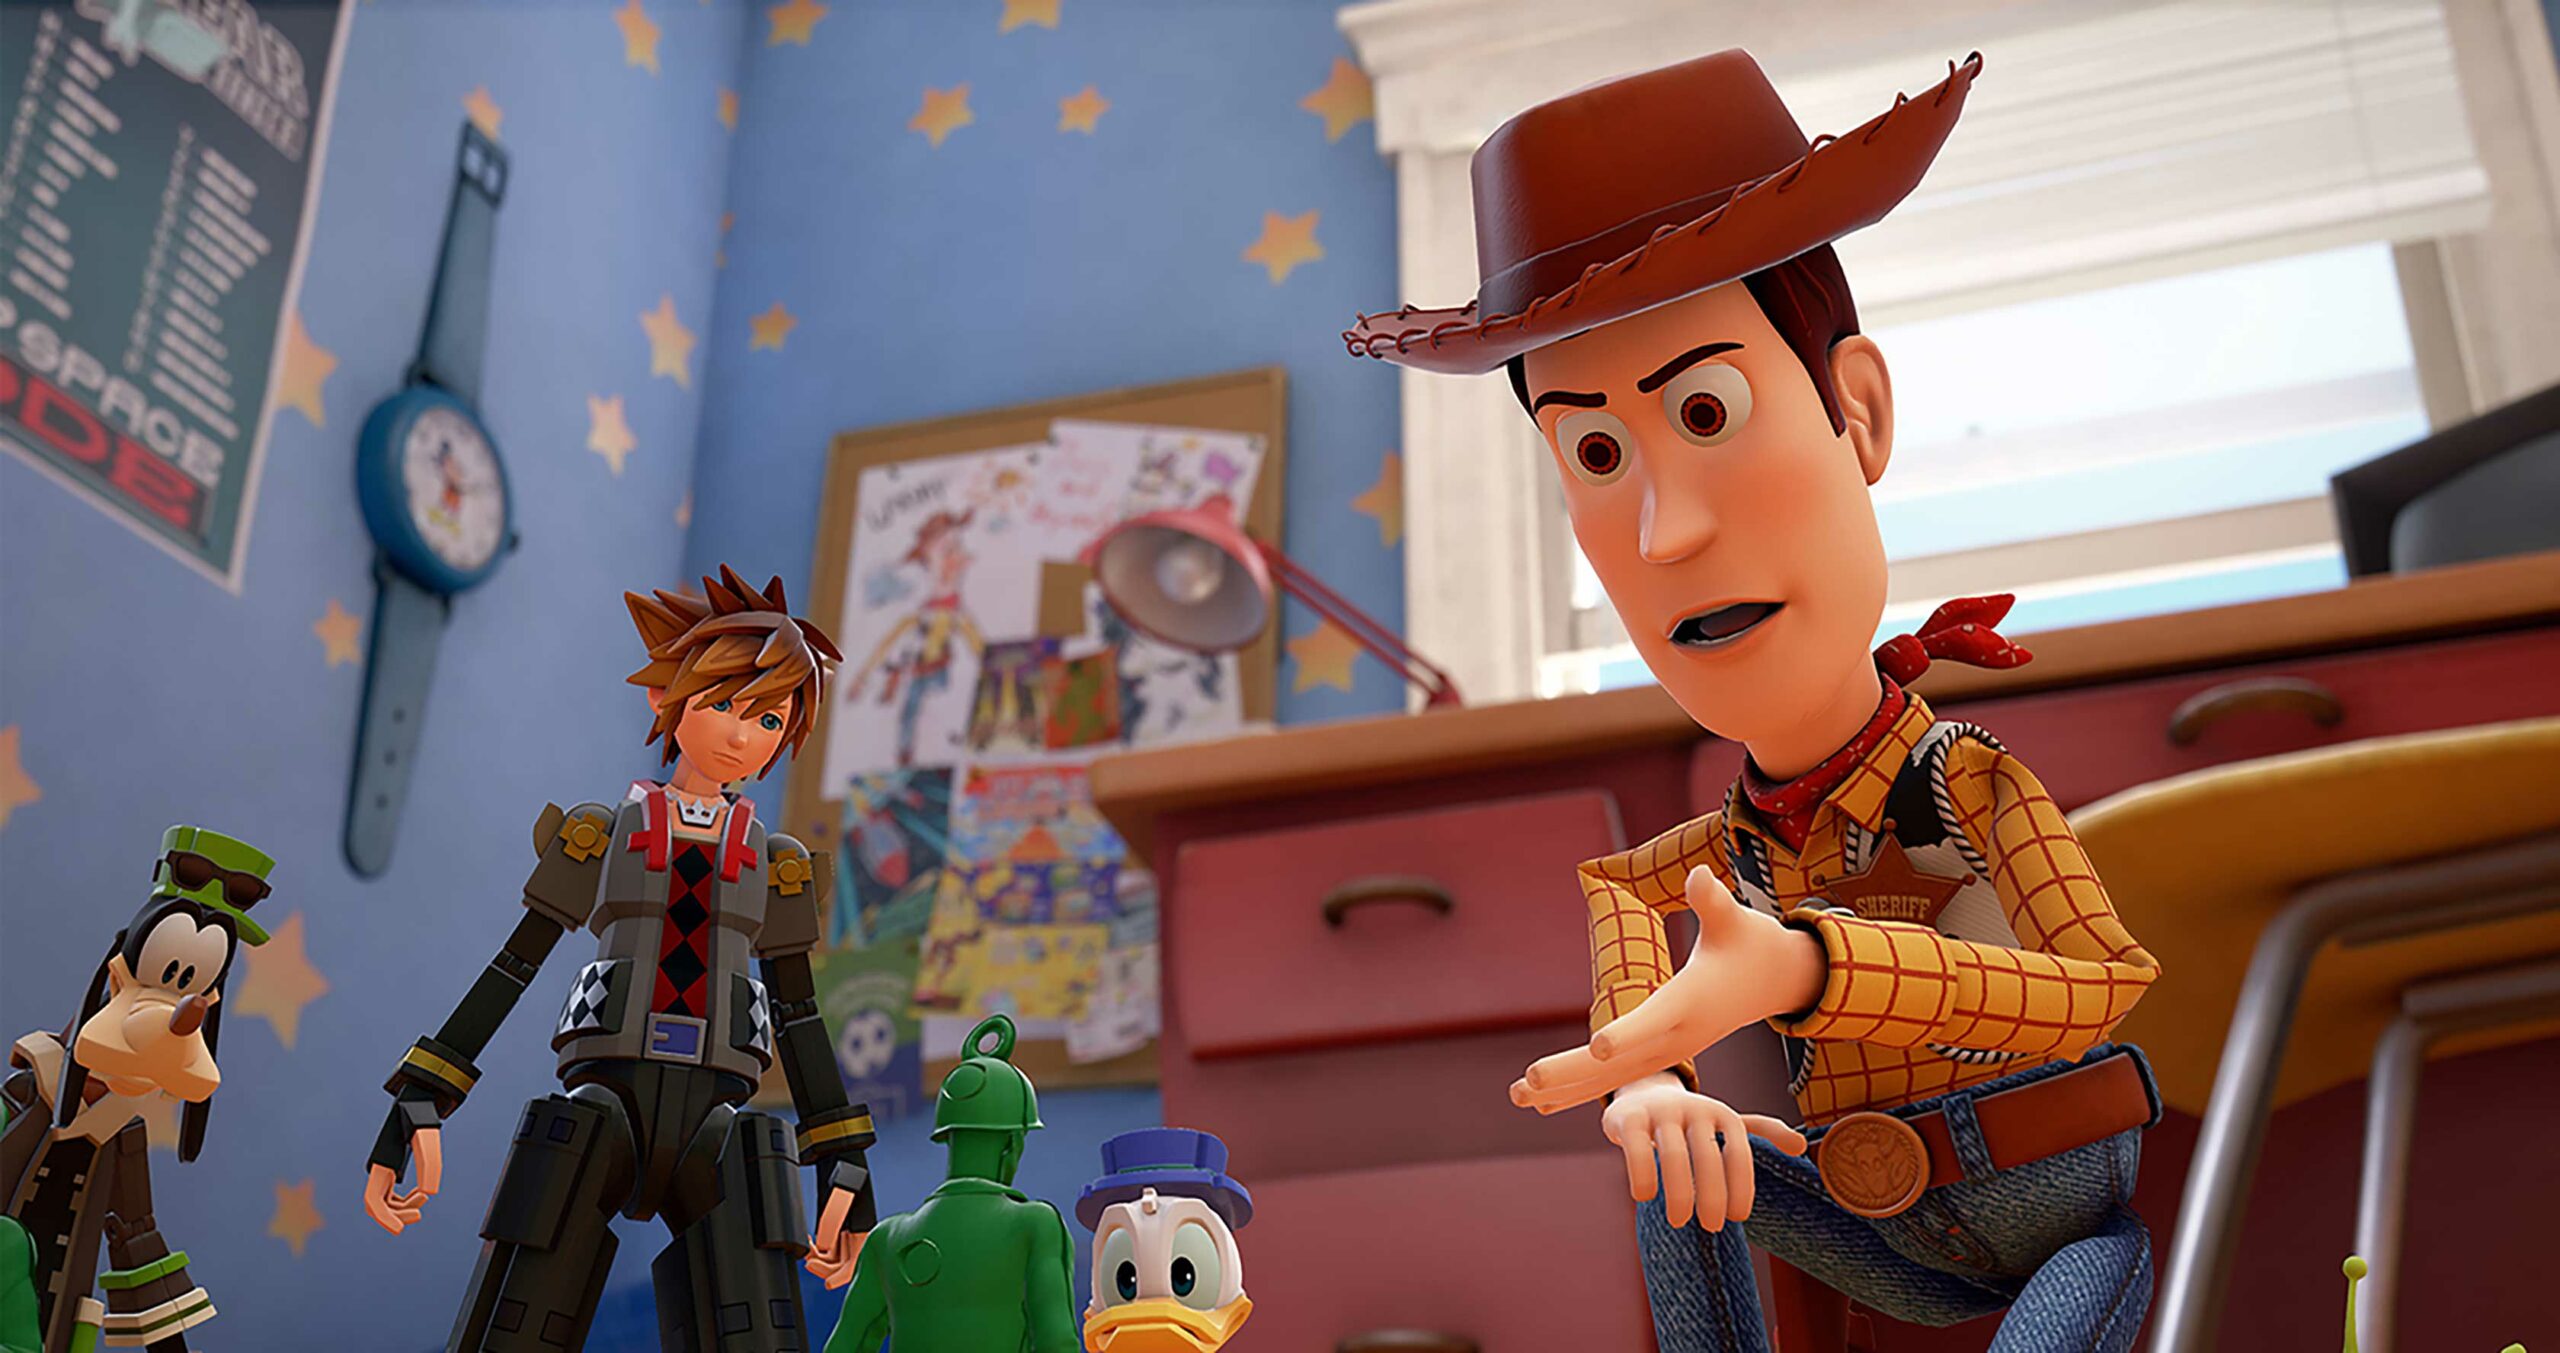 Animated Kingdom Hearts series reportedly in development for Disney+